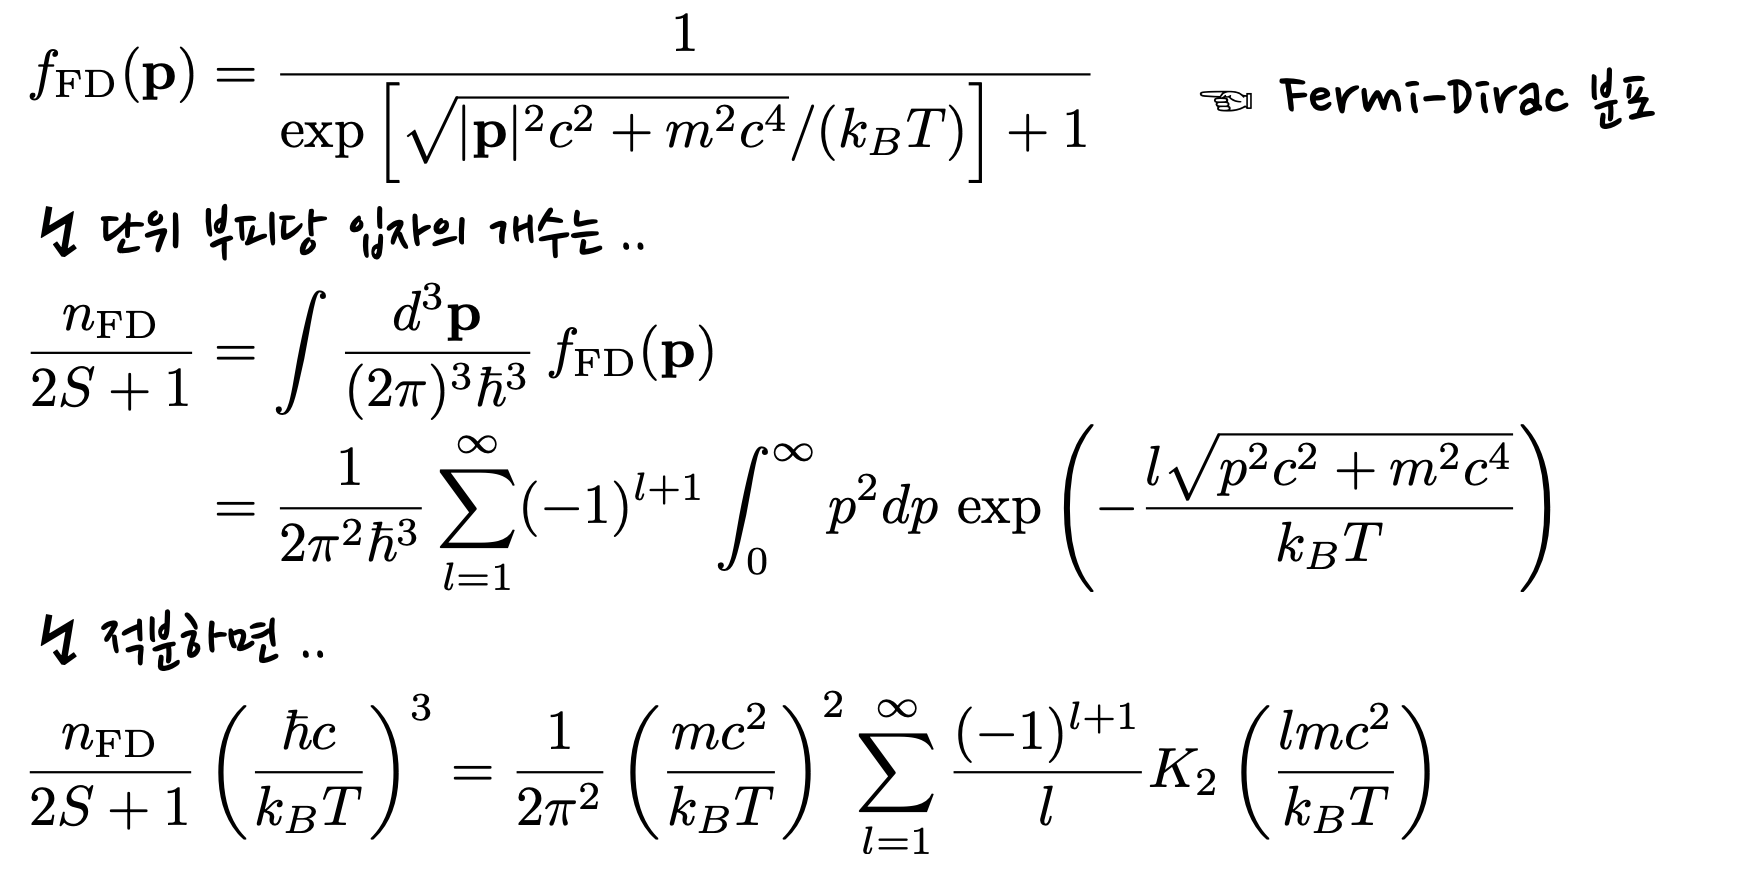 formulae for number density of fermions, derived from relativistic Fermi-Dirac thermal distribution function